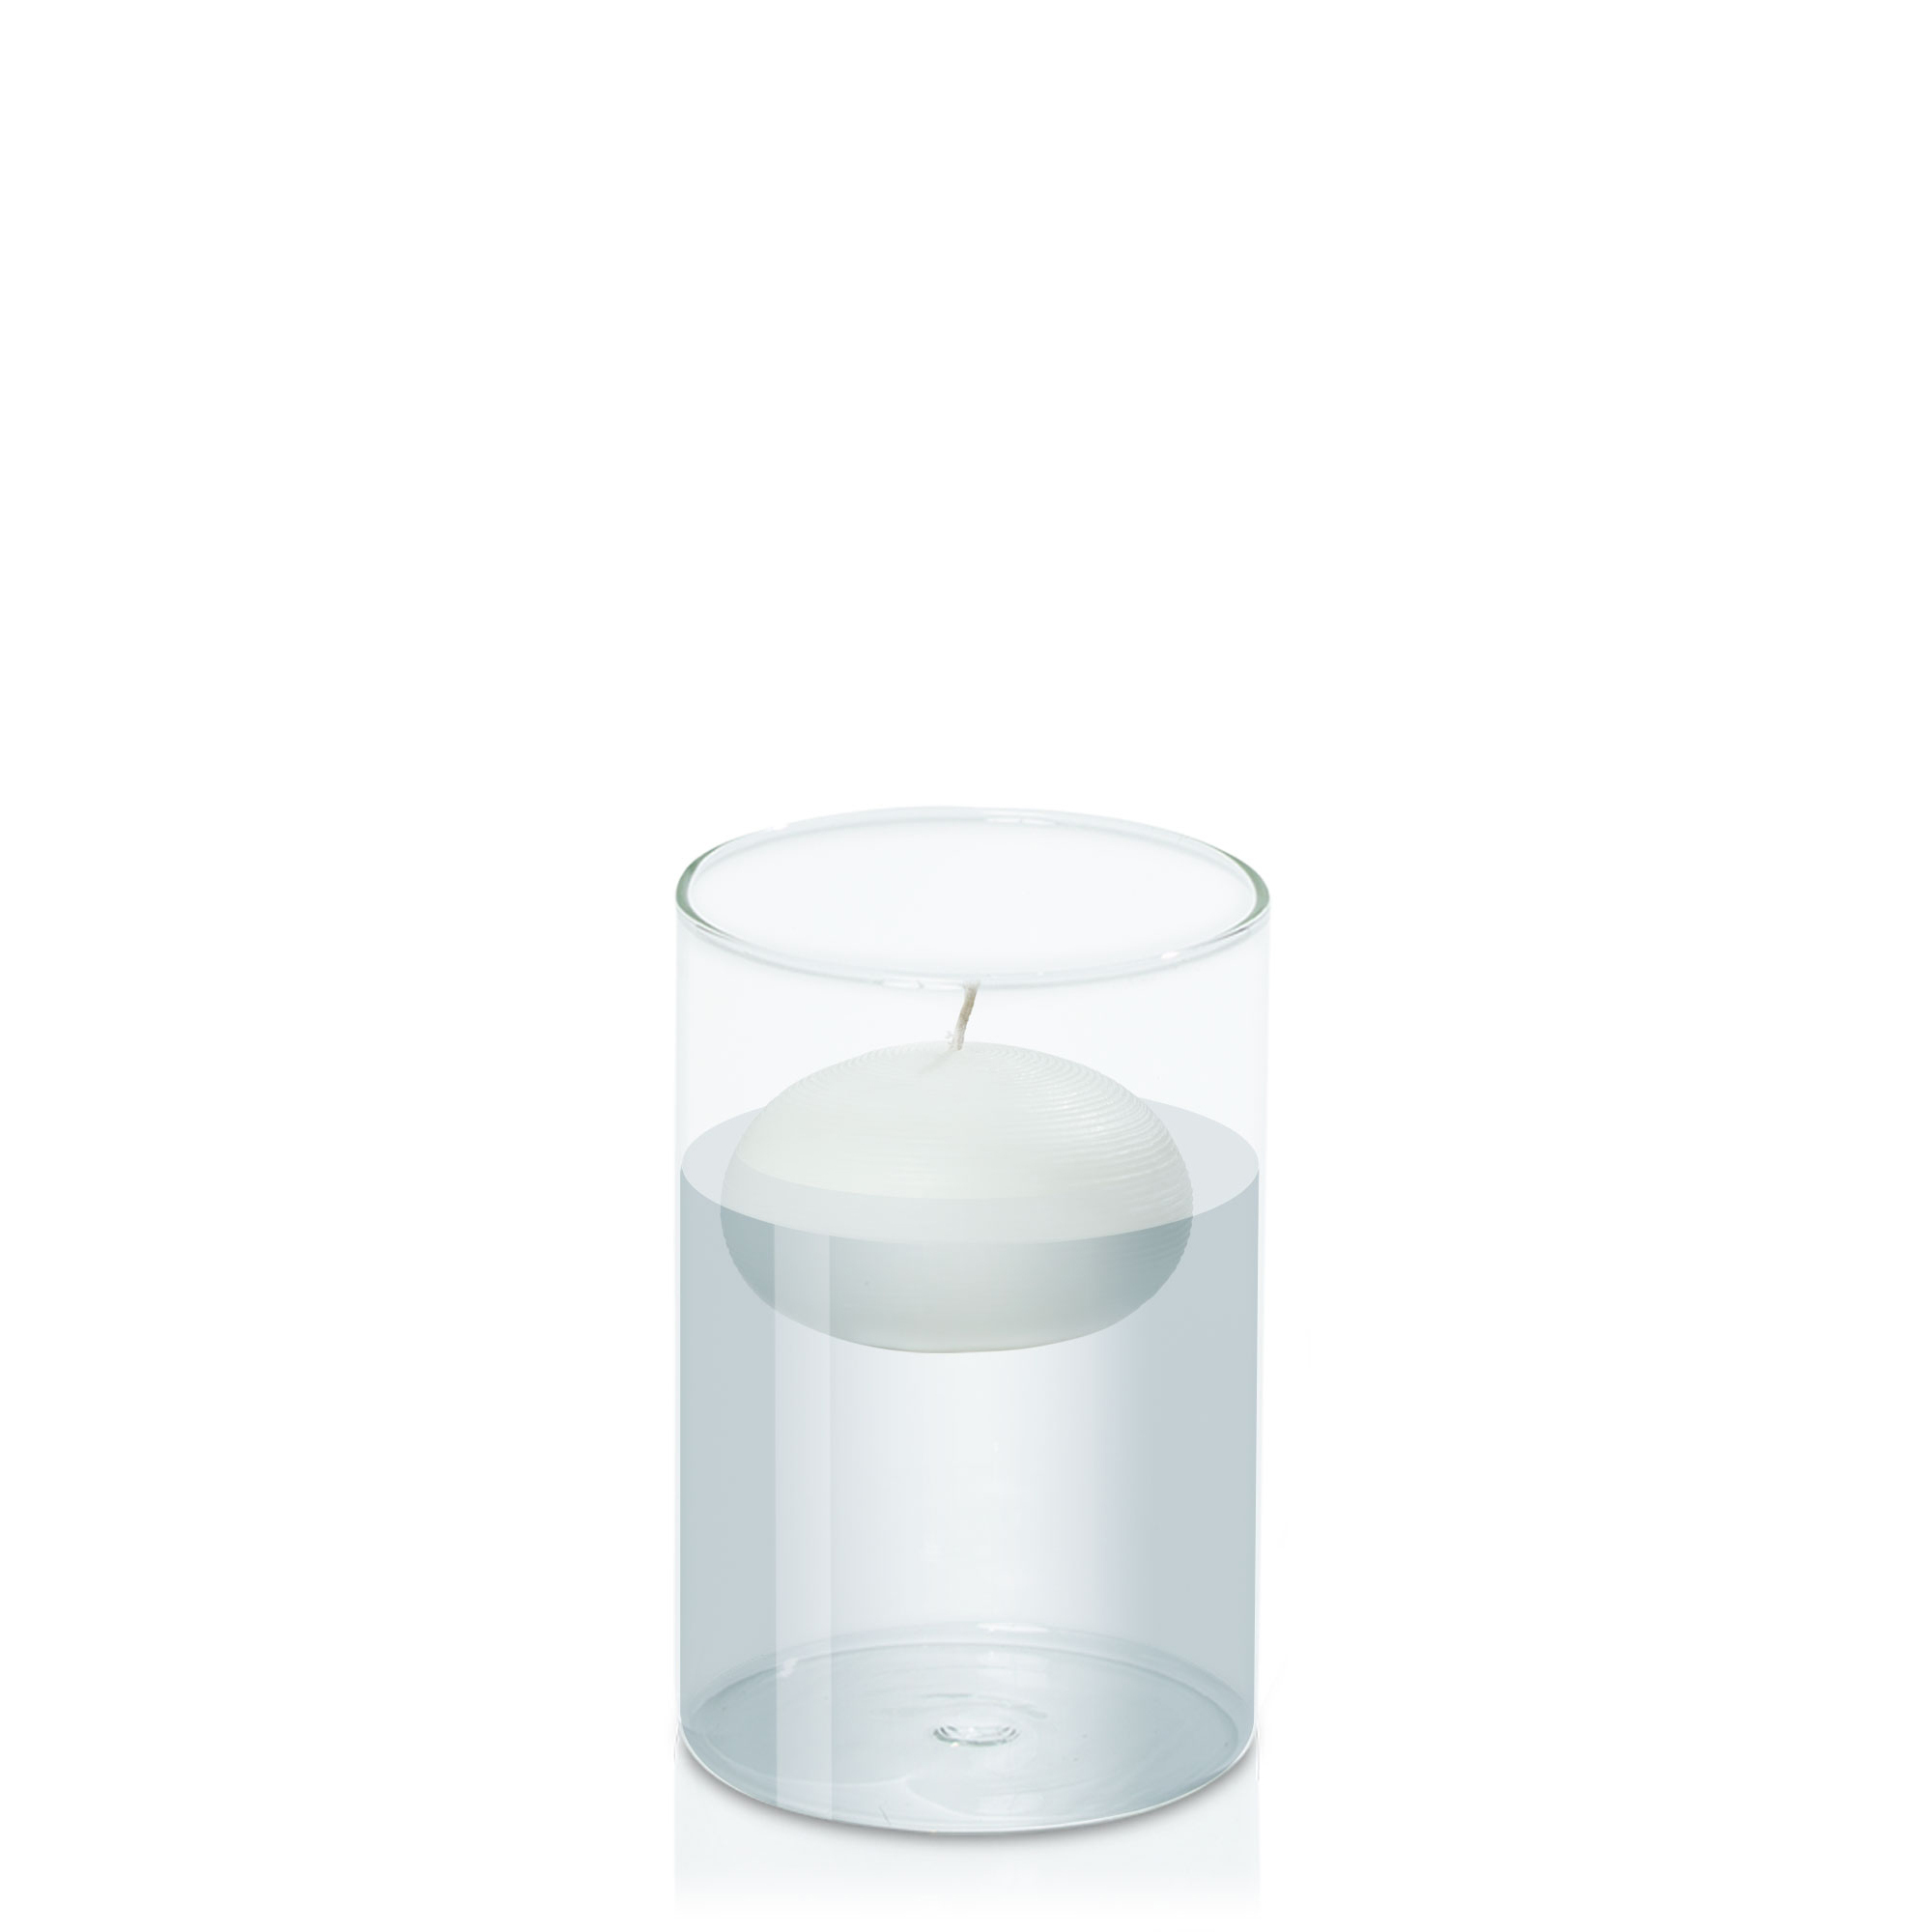 7.5cm Floating Candle in 10cm x 15cm Glass